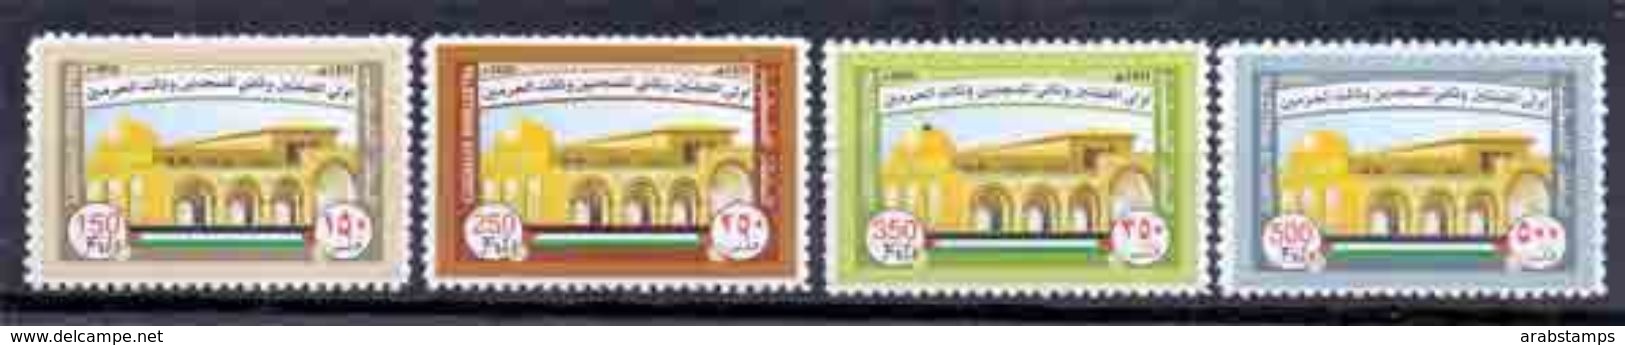 2010 Palestinian AL-Aqsa In Muslims' Hearts Complete Set 4 Values MNH - Palestine